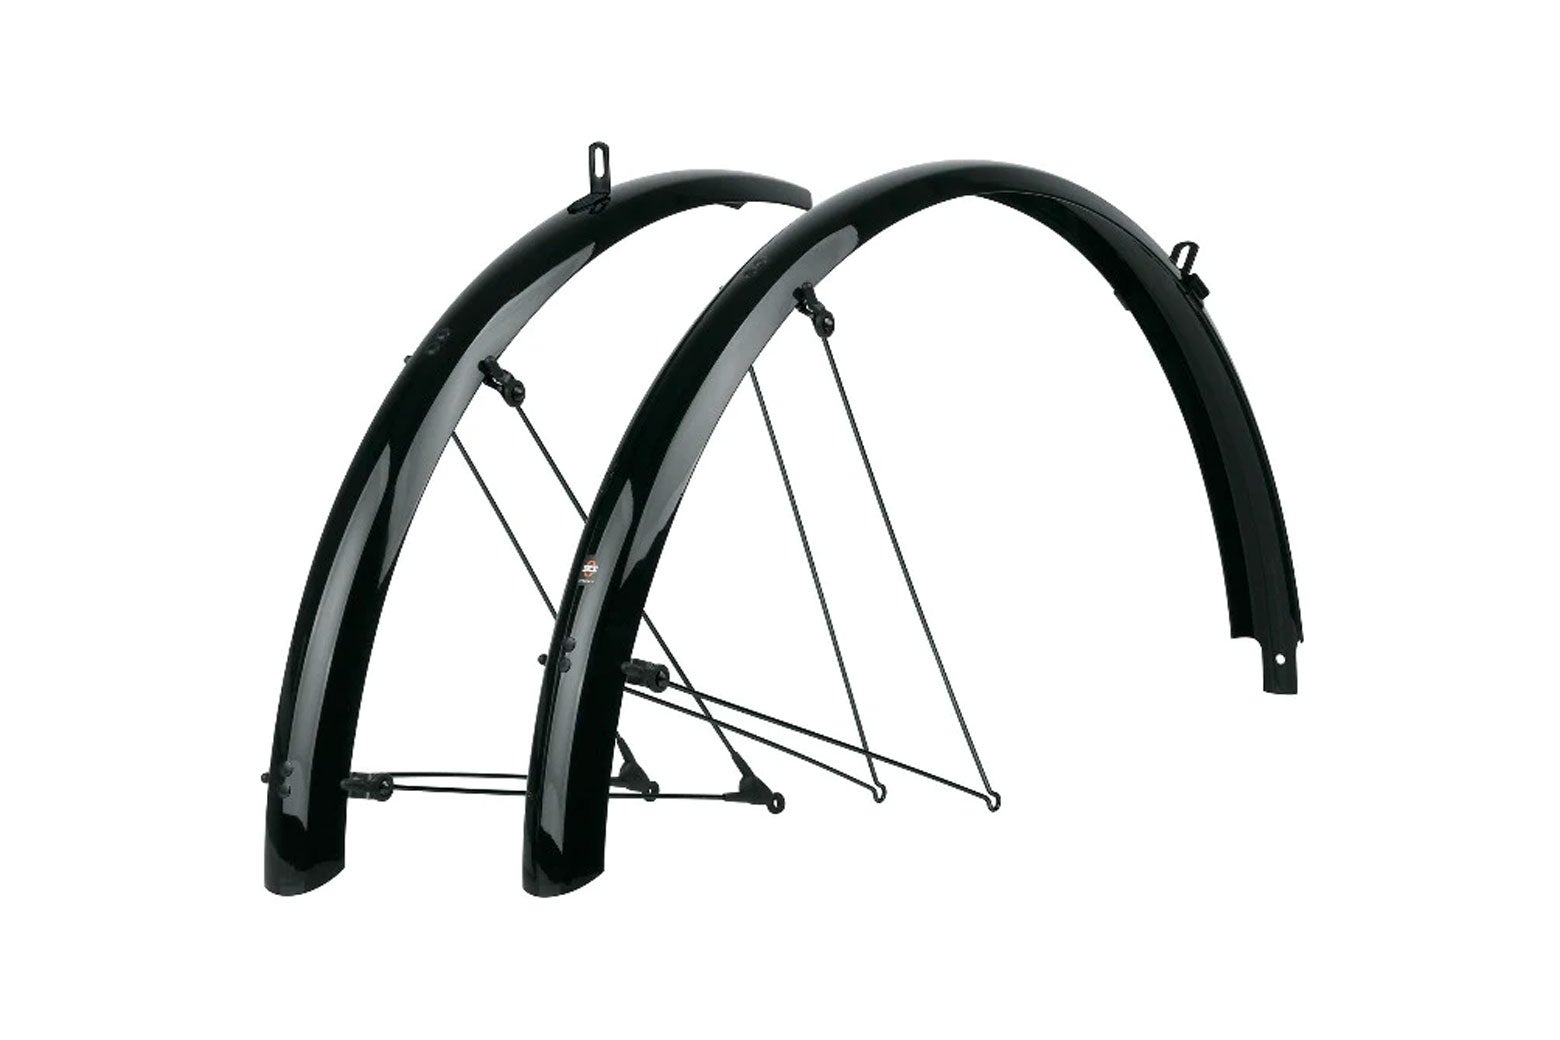 Black fenders that are half-circles to go over your bike tires.